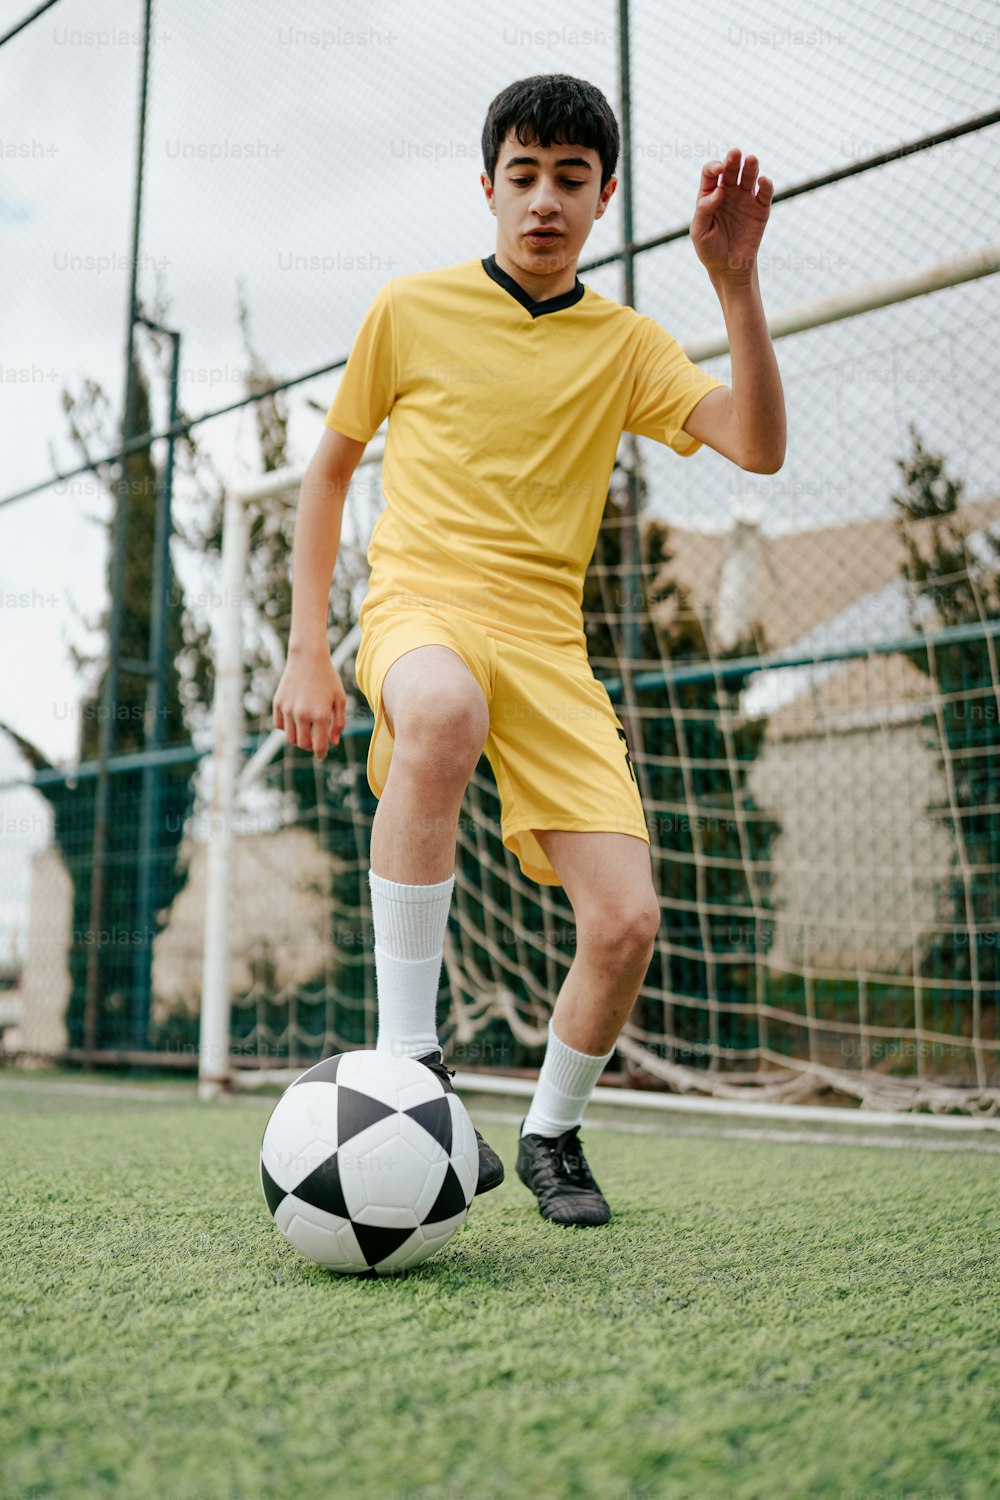 a young boy kicking a soccer ball on a field